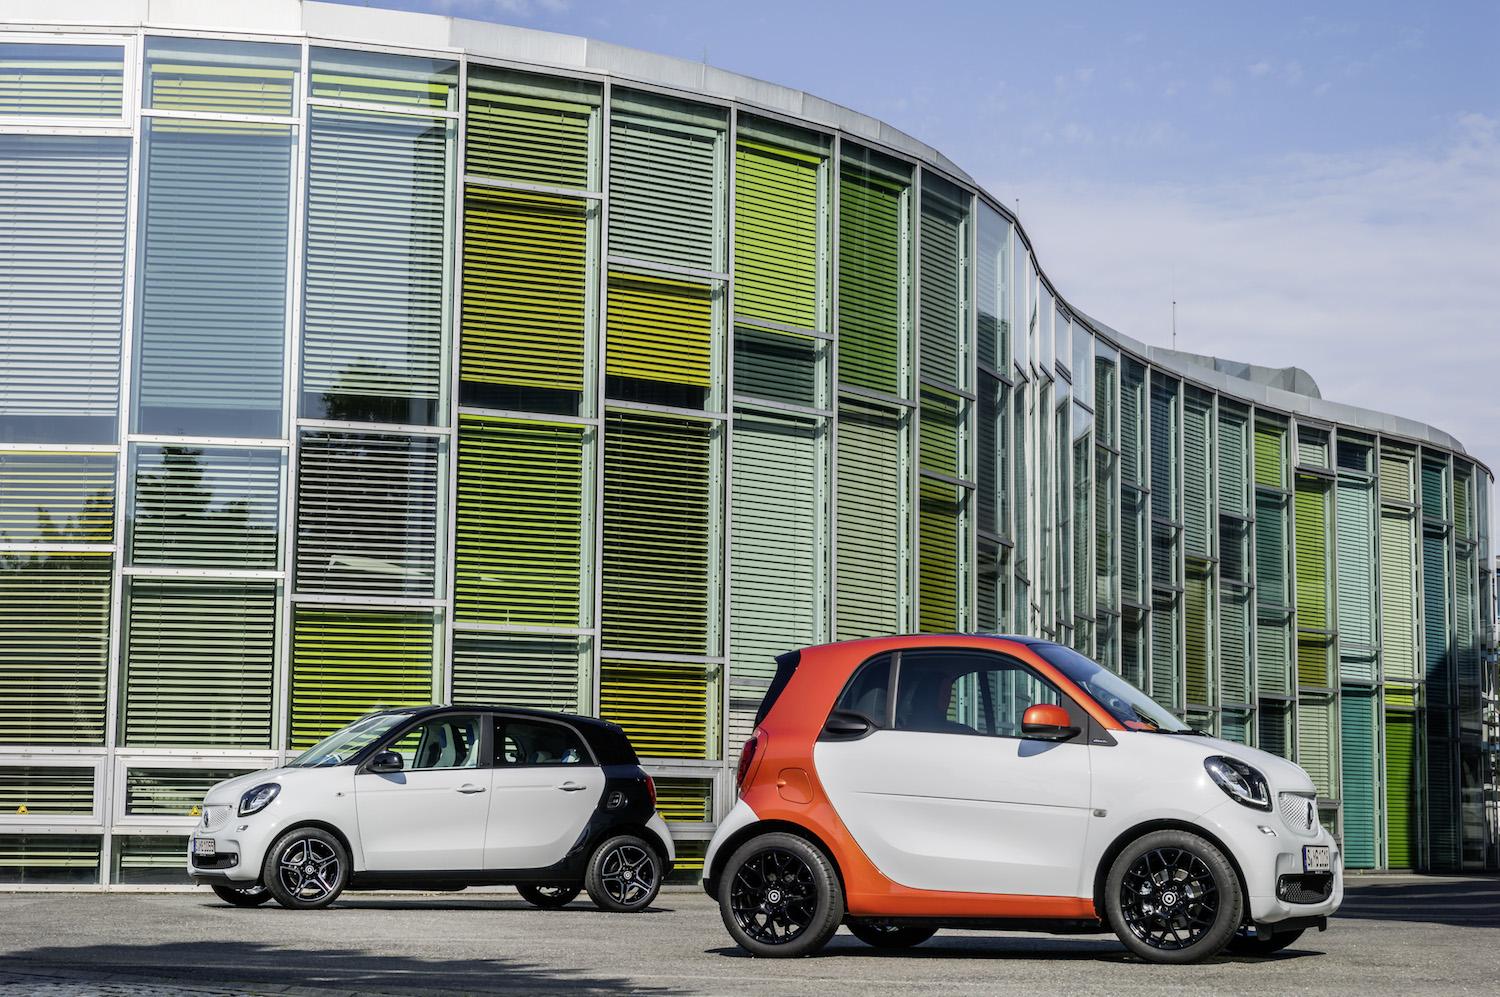 2016 smart fortwo